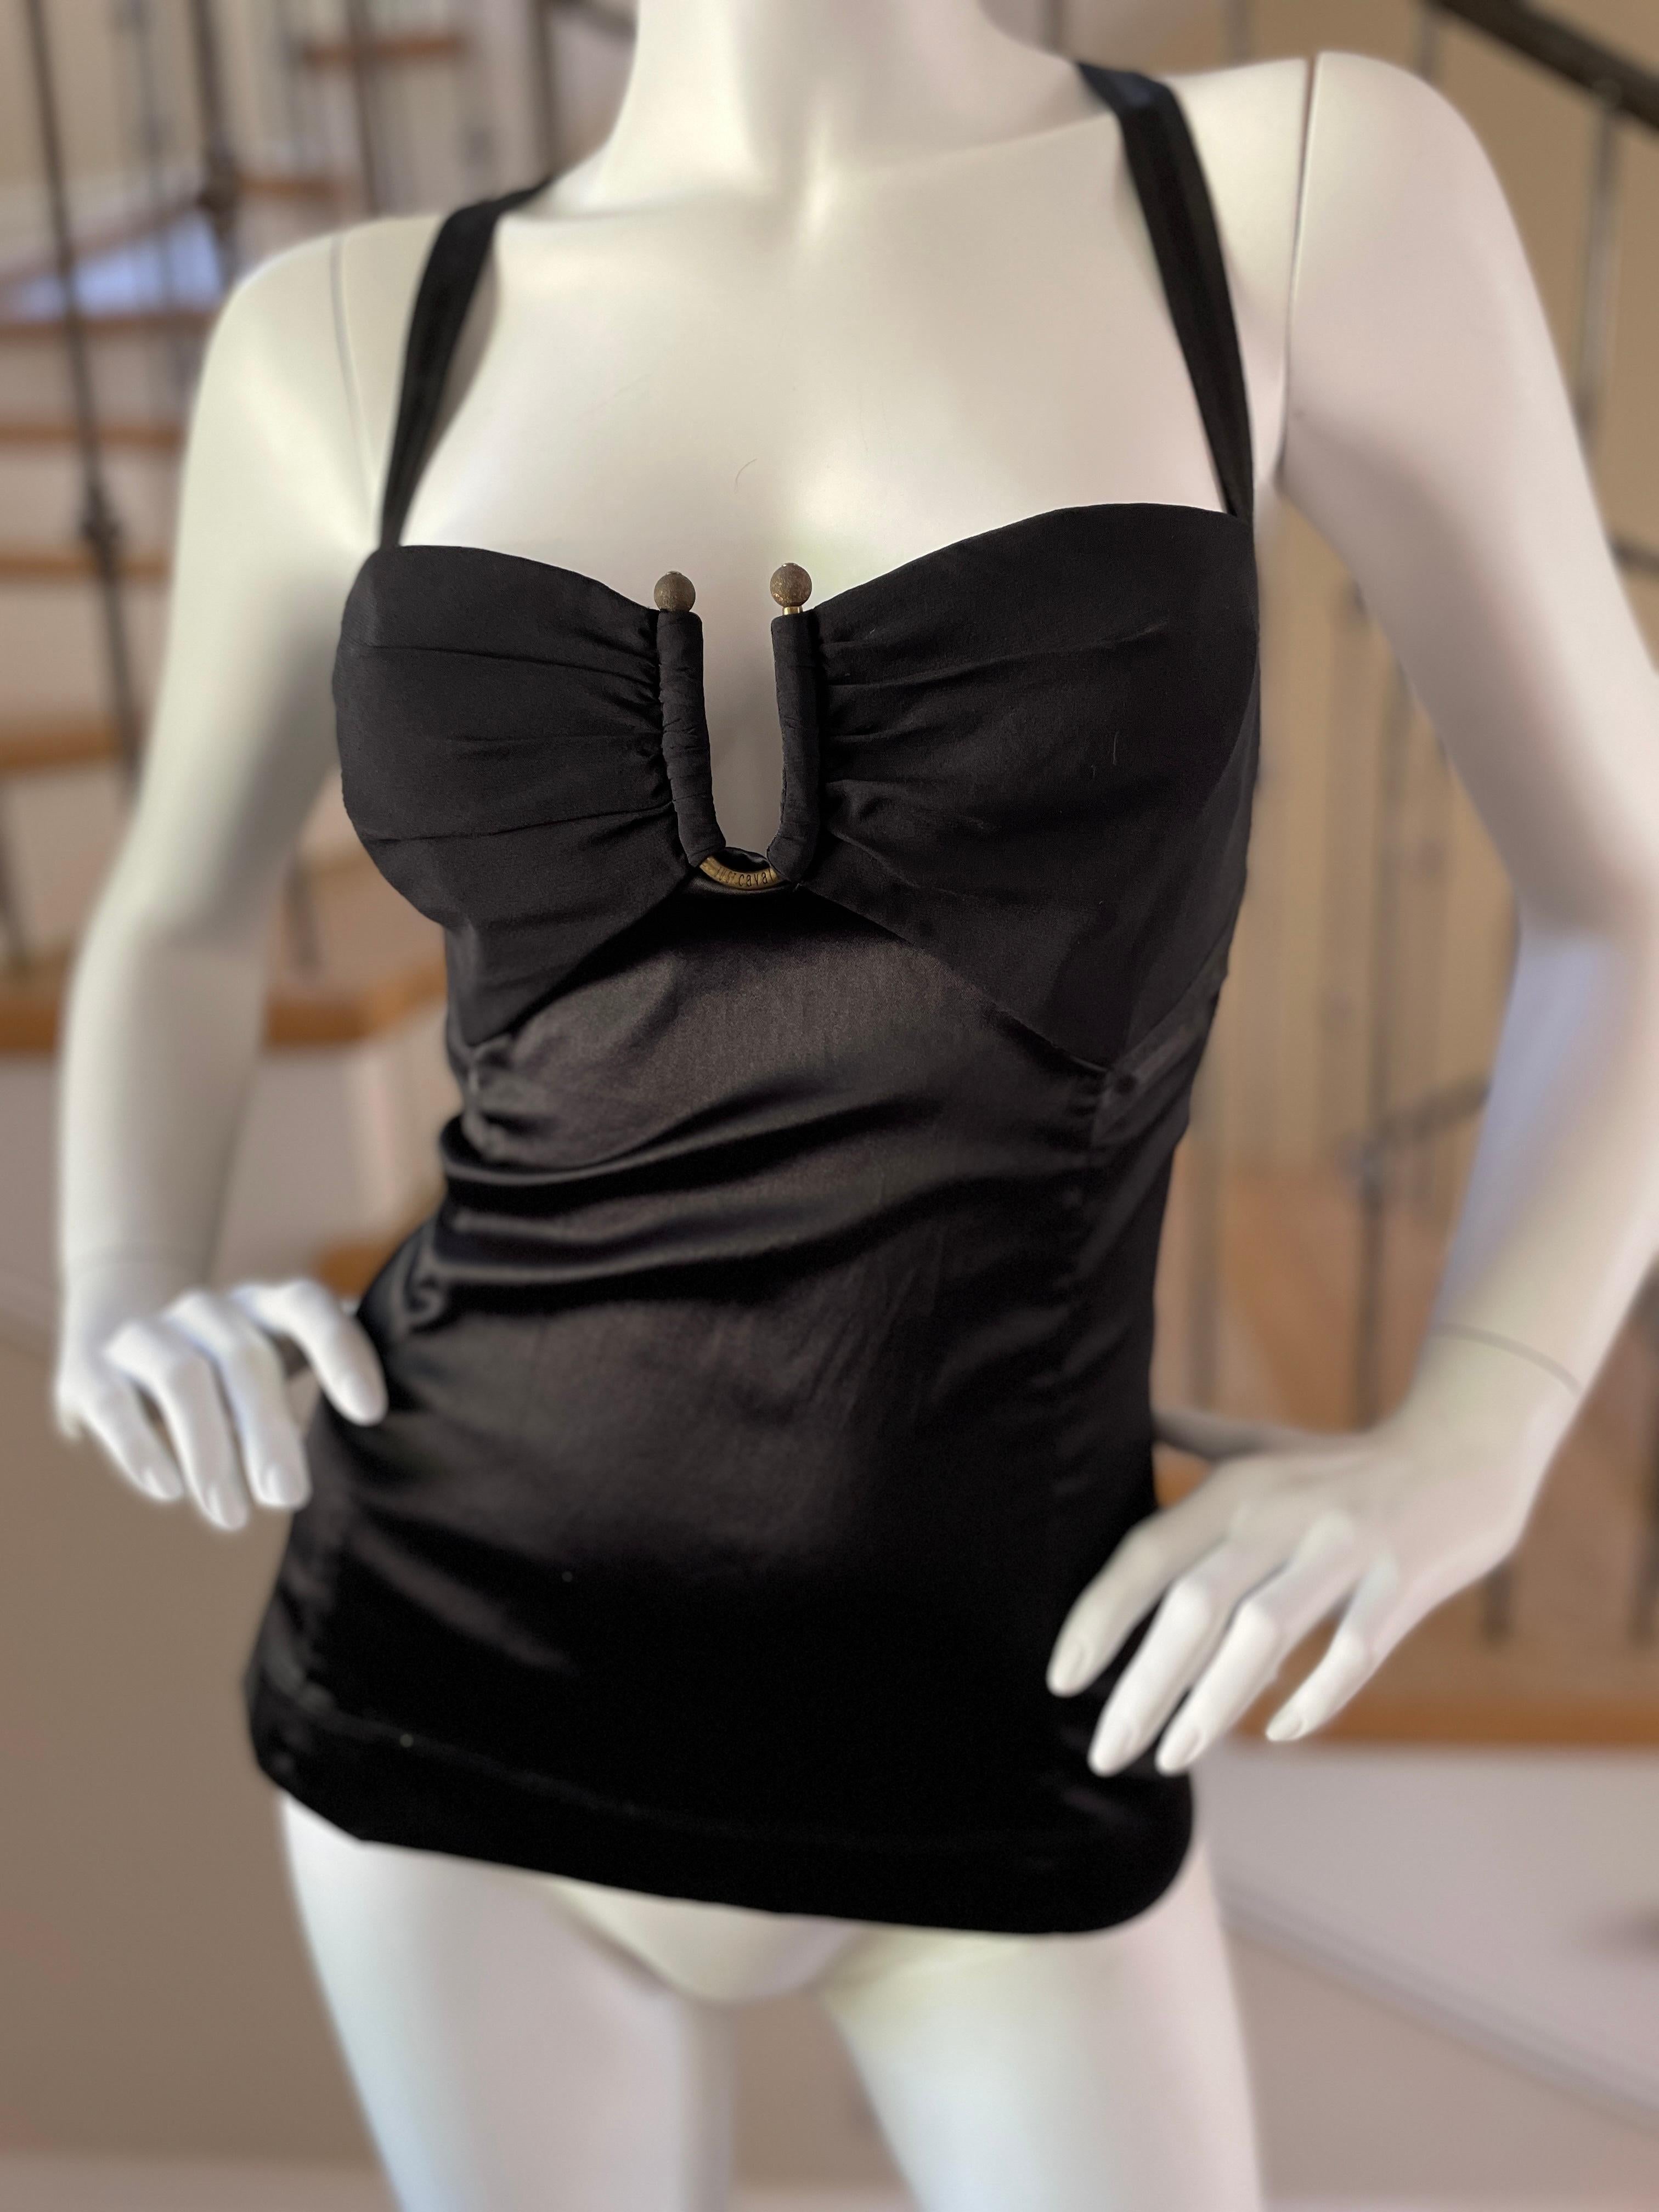 Just Cavalli by Roberto Cavalli Black Corset Top Size 46 In Excellent Condition For Sale In Cloverdale, CA